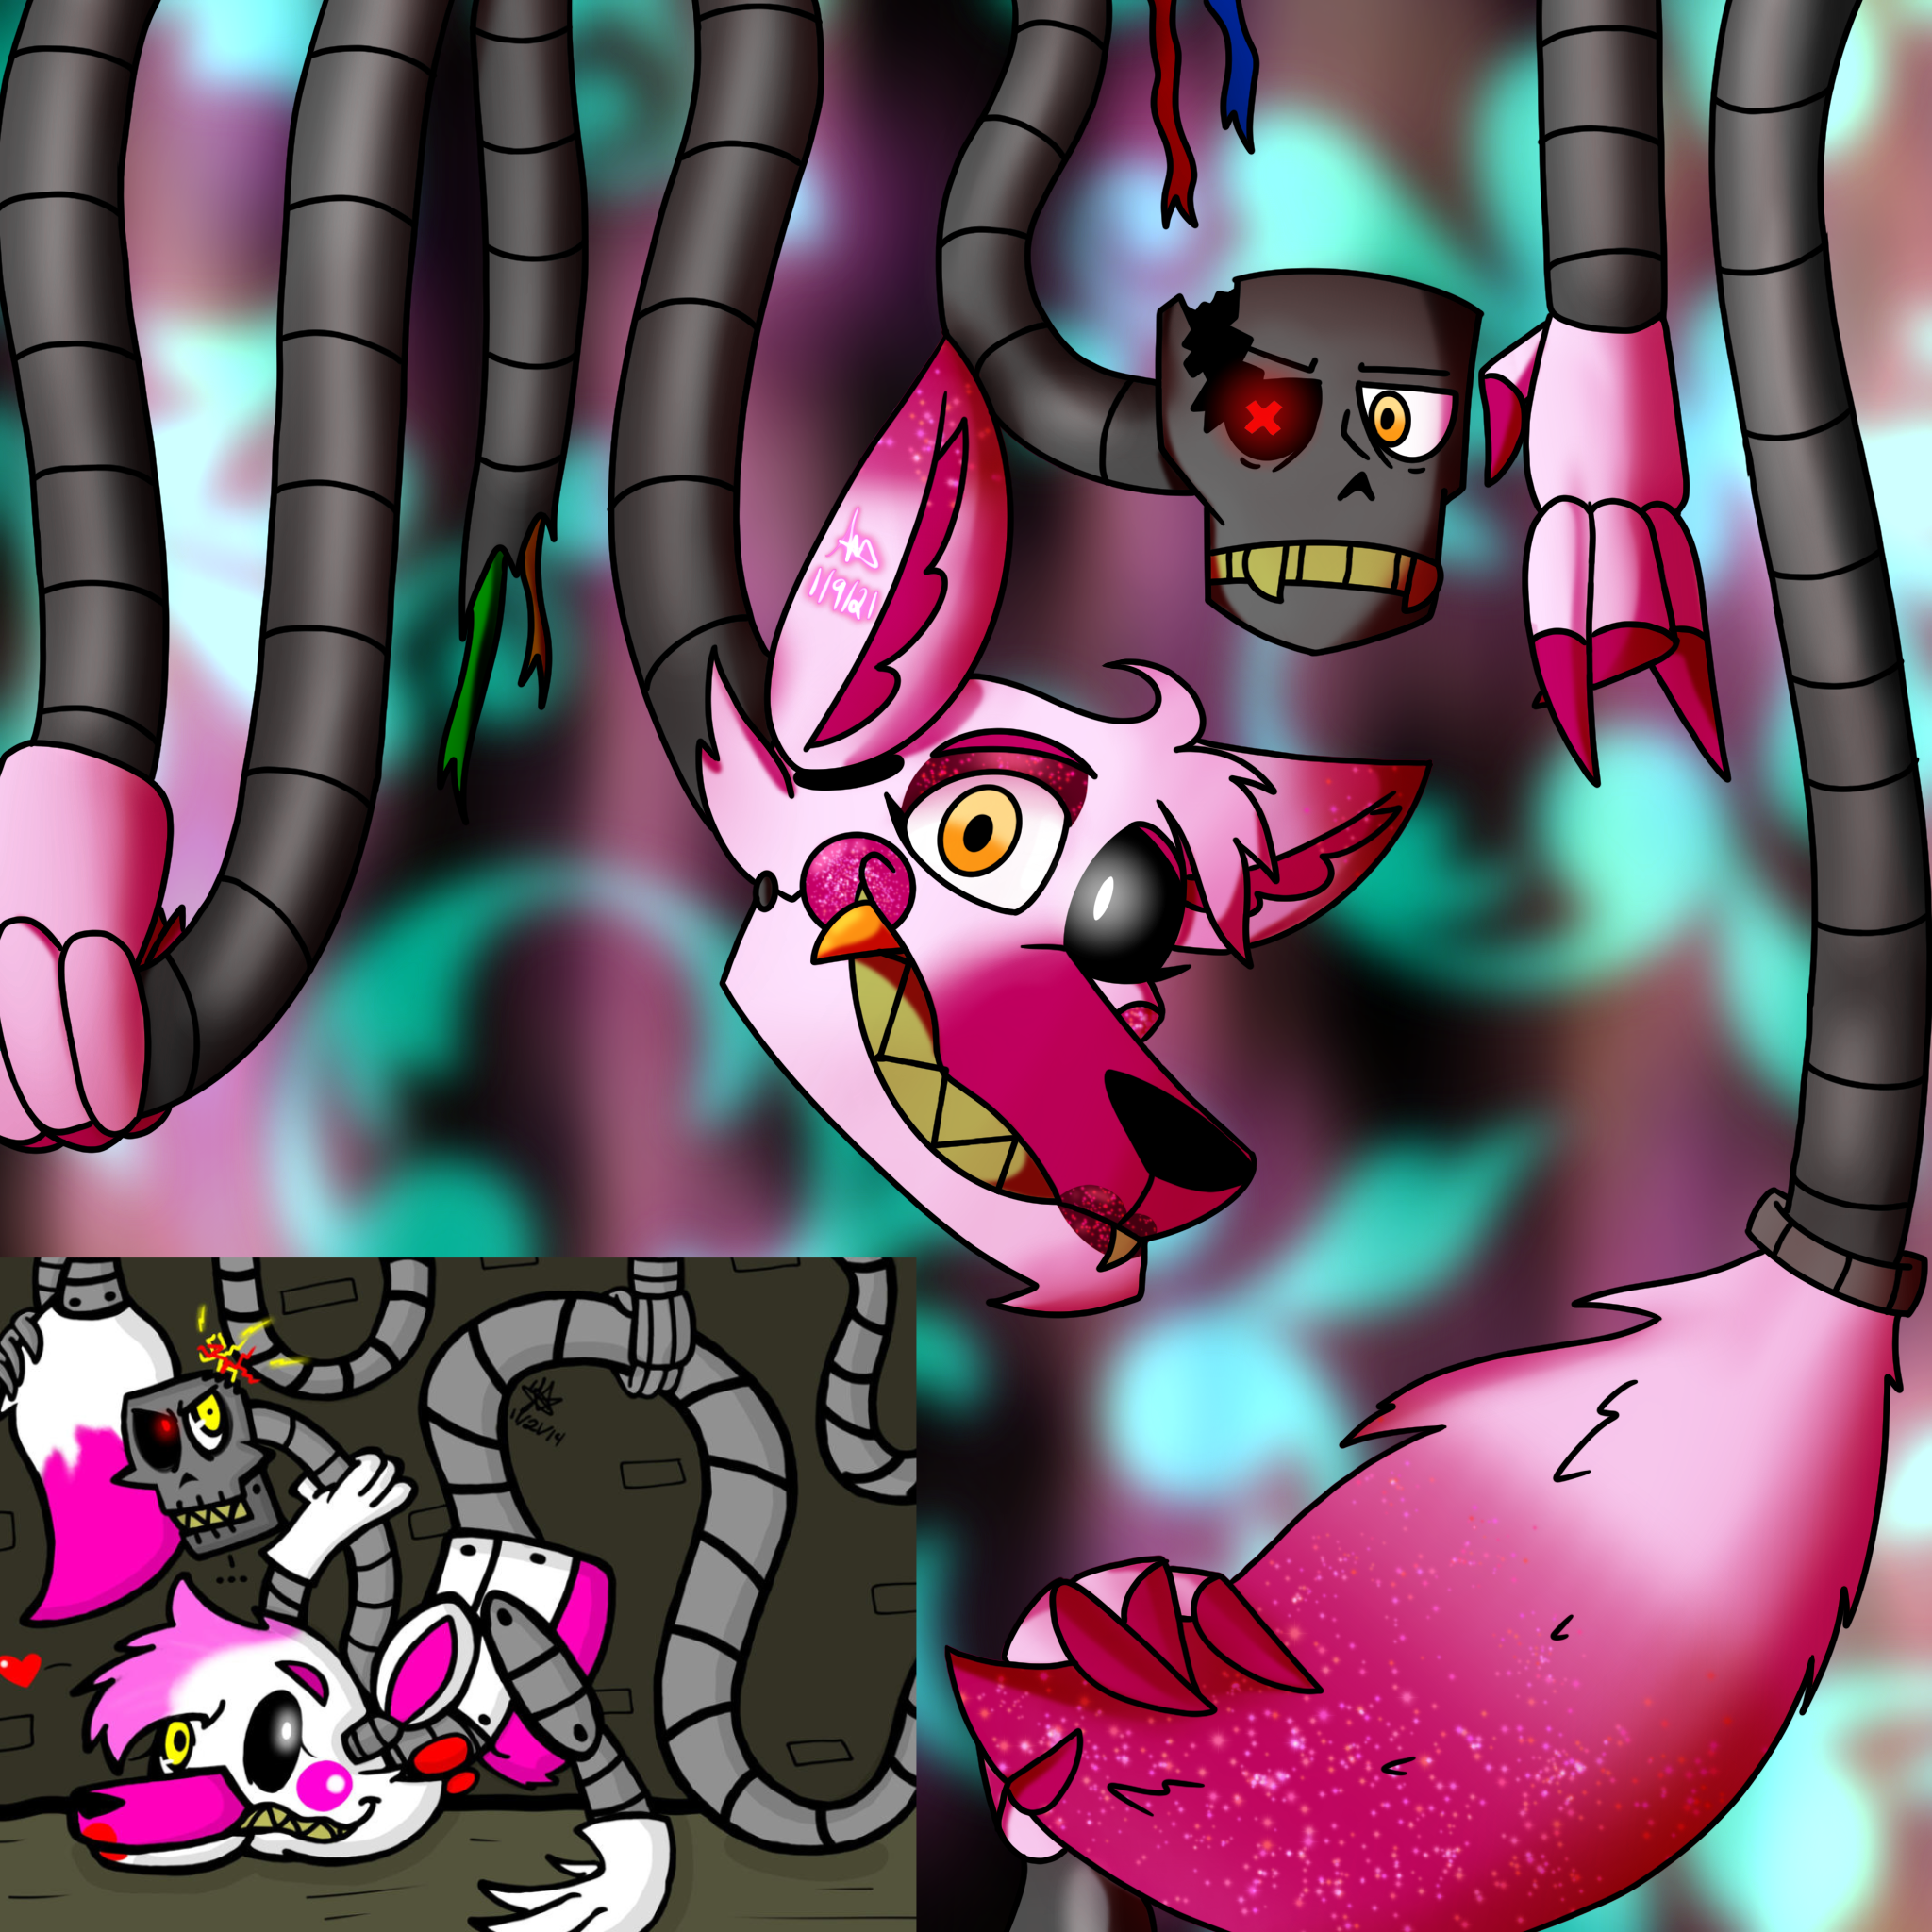 Anime version of Fixed Mangle by SpaceBear87 on Instagram : r